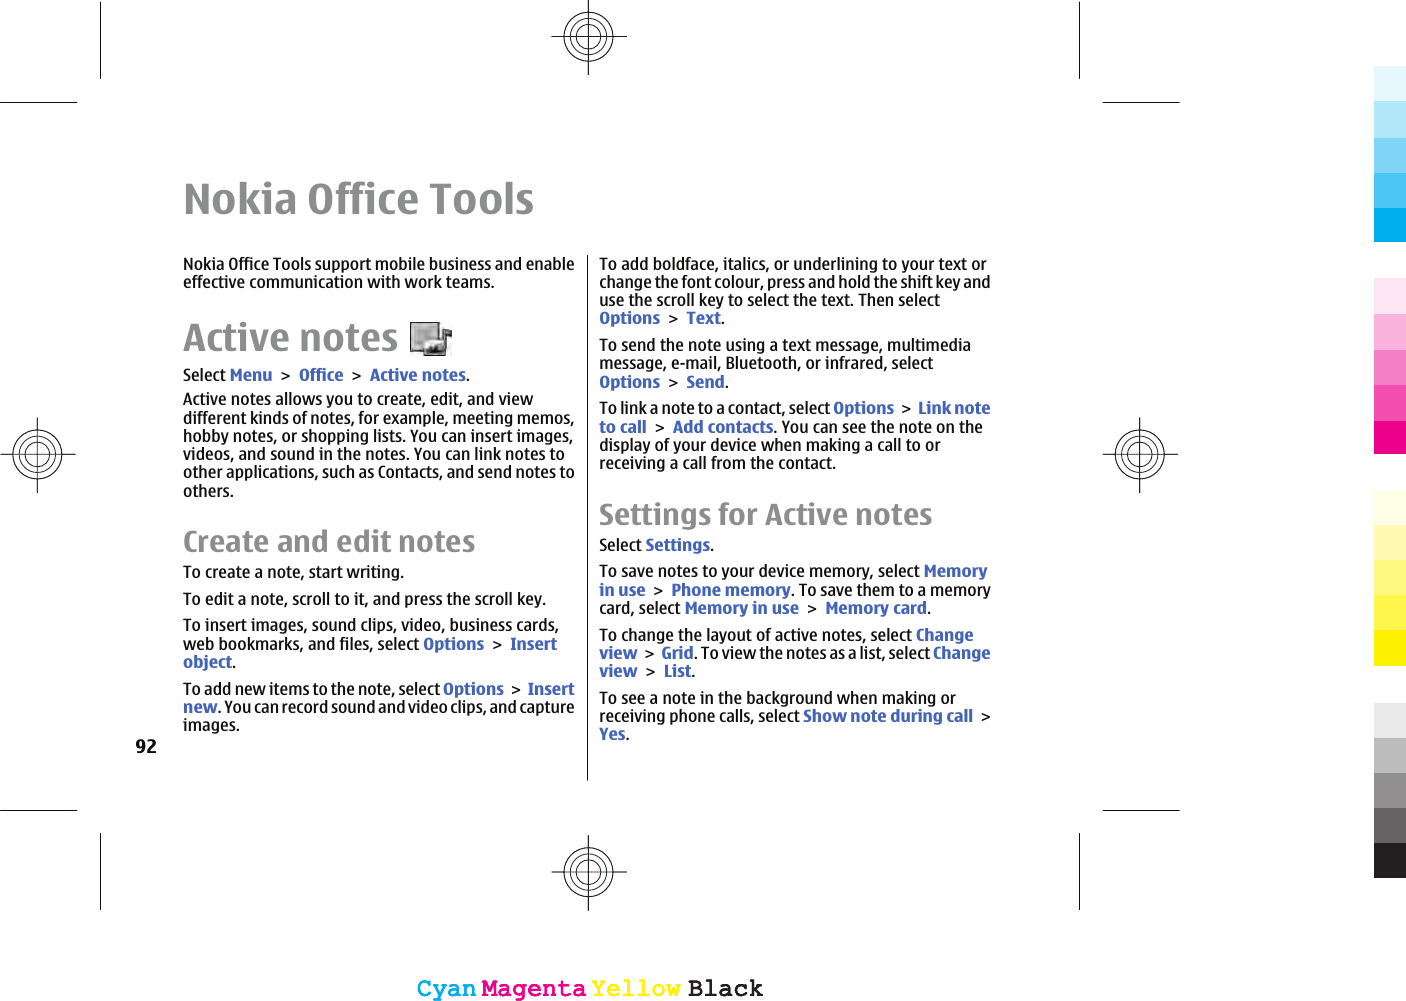 Nokia Office ToolsNokia Office Tools support mobile business and enableeffective communication with work teams.Active notesSelect MenuOfficeActive notes.Active notes allows you to create, edit, and viewdifferent kinds of notes, for example, meeting memos,hobby notes, or shopping lists. You can insert images,videos, and sound in the notes. You can link notes toother applications, such as Contacts, and send notes toothers.Create and edit notesTo create a note, start writing.To edit a note, scroll to it, and press the scroll key.To insert images, sound clips, video, business cards,web bookmarks, and files, select OptionsInsertobject.To add new items to the note, select OptionsInsertnew. You can record sound and video clips, and captureimages.To add boldface, italics, or underlining to your text orchange the font colour, press and hold the shift key anduse the scroll key to select the text. Then selectOptionsText.To send the note using a text message, multimediamessage, e-mail, Bluetooth, or infrared, selectOptionsSend.To link a note to a contact, select OptionsLink noteto callAdd contacts. You can see the note on thedisplay of your device when making a call to orreceiving a call from the contact.Settings for Active notesSelect Settings.To save notes to your device memory, select Memoryin usePhone memory. To save them to a memorycard, select Memory in useMemory card.To change the layout of active notes, select ChangeviewGrid. To view the notes as a list, select ChangeviewList.To see a note in the background when making orreceiving phone calls, select Show note during callYes.92CyanCyanMagentaMagentaYellowYellowBlackBlackCyanCyanMagentaMagentaYellowYellowBlackBlack